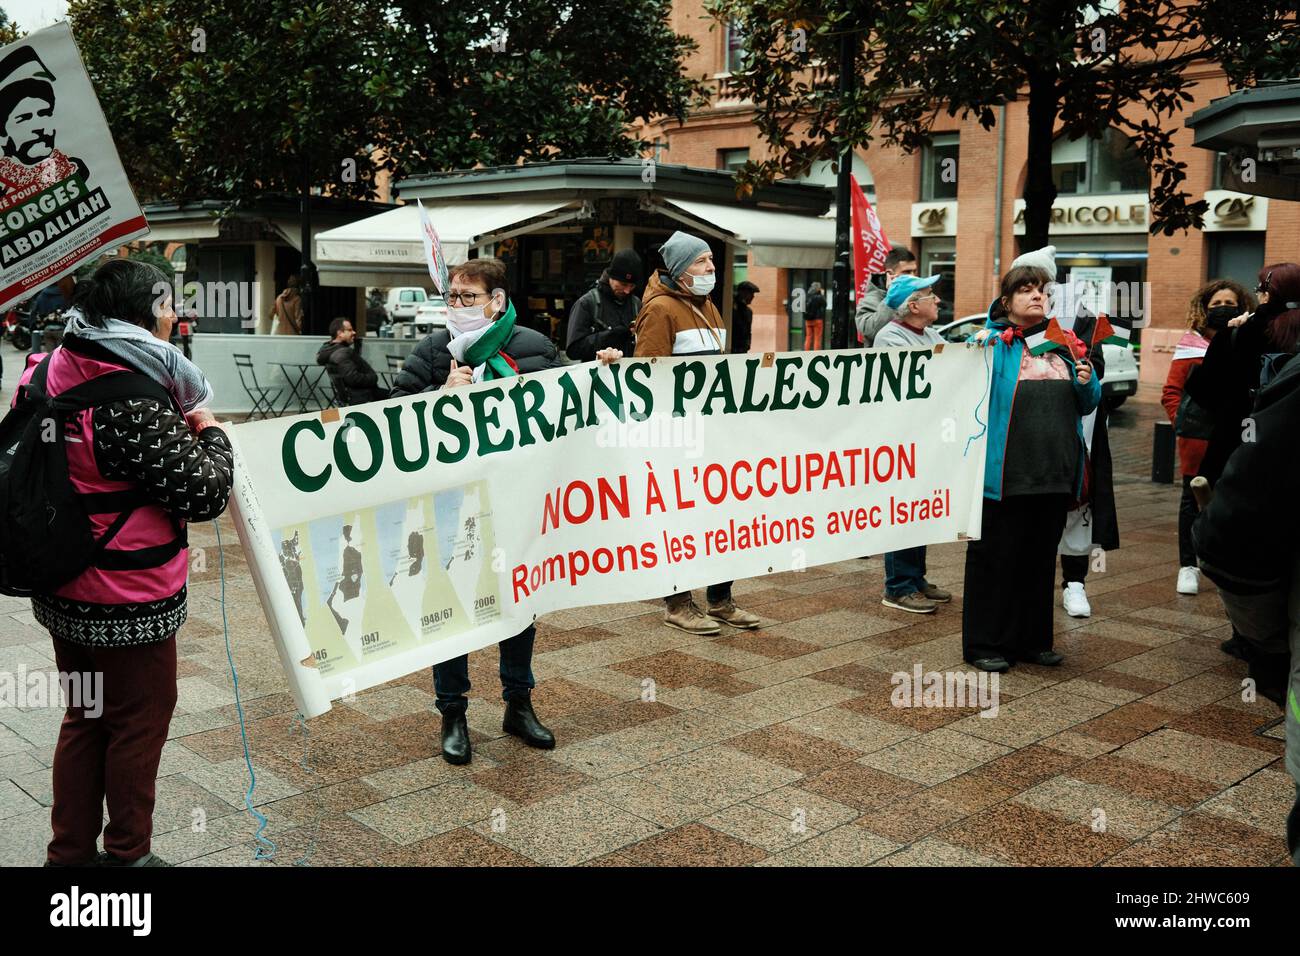 Toulouse, France. 05th Mar, 2022. Baner of 'Couserans Palestine', against israeli occupation. The french Minister of the Interior requested, on the decision of the President of the Republic, the dissolution of the 'Collectif Palestine Vaincra' (collective Palestin will win). Accused of 'incitement to hatred, discrimination, violence' and 'provocation to terrorist acts', the collective defends itself from any amalgamation, limiting itself to calls for a regular boycott of Israeli products or companies, or to the denunciation of the cultural twinning of the city with Tel Aviv. Toulouse (France), Stock Photo